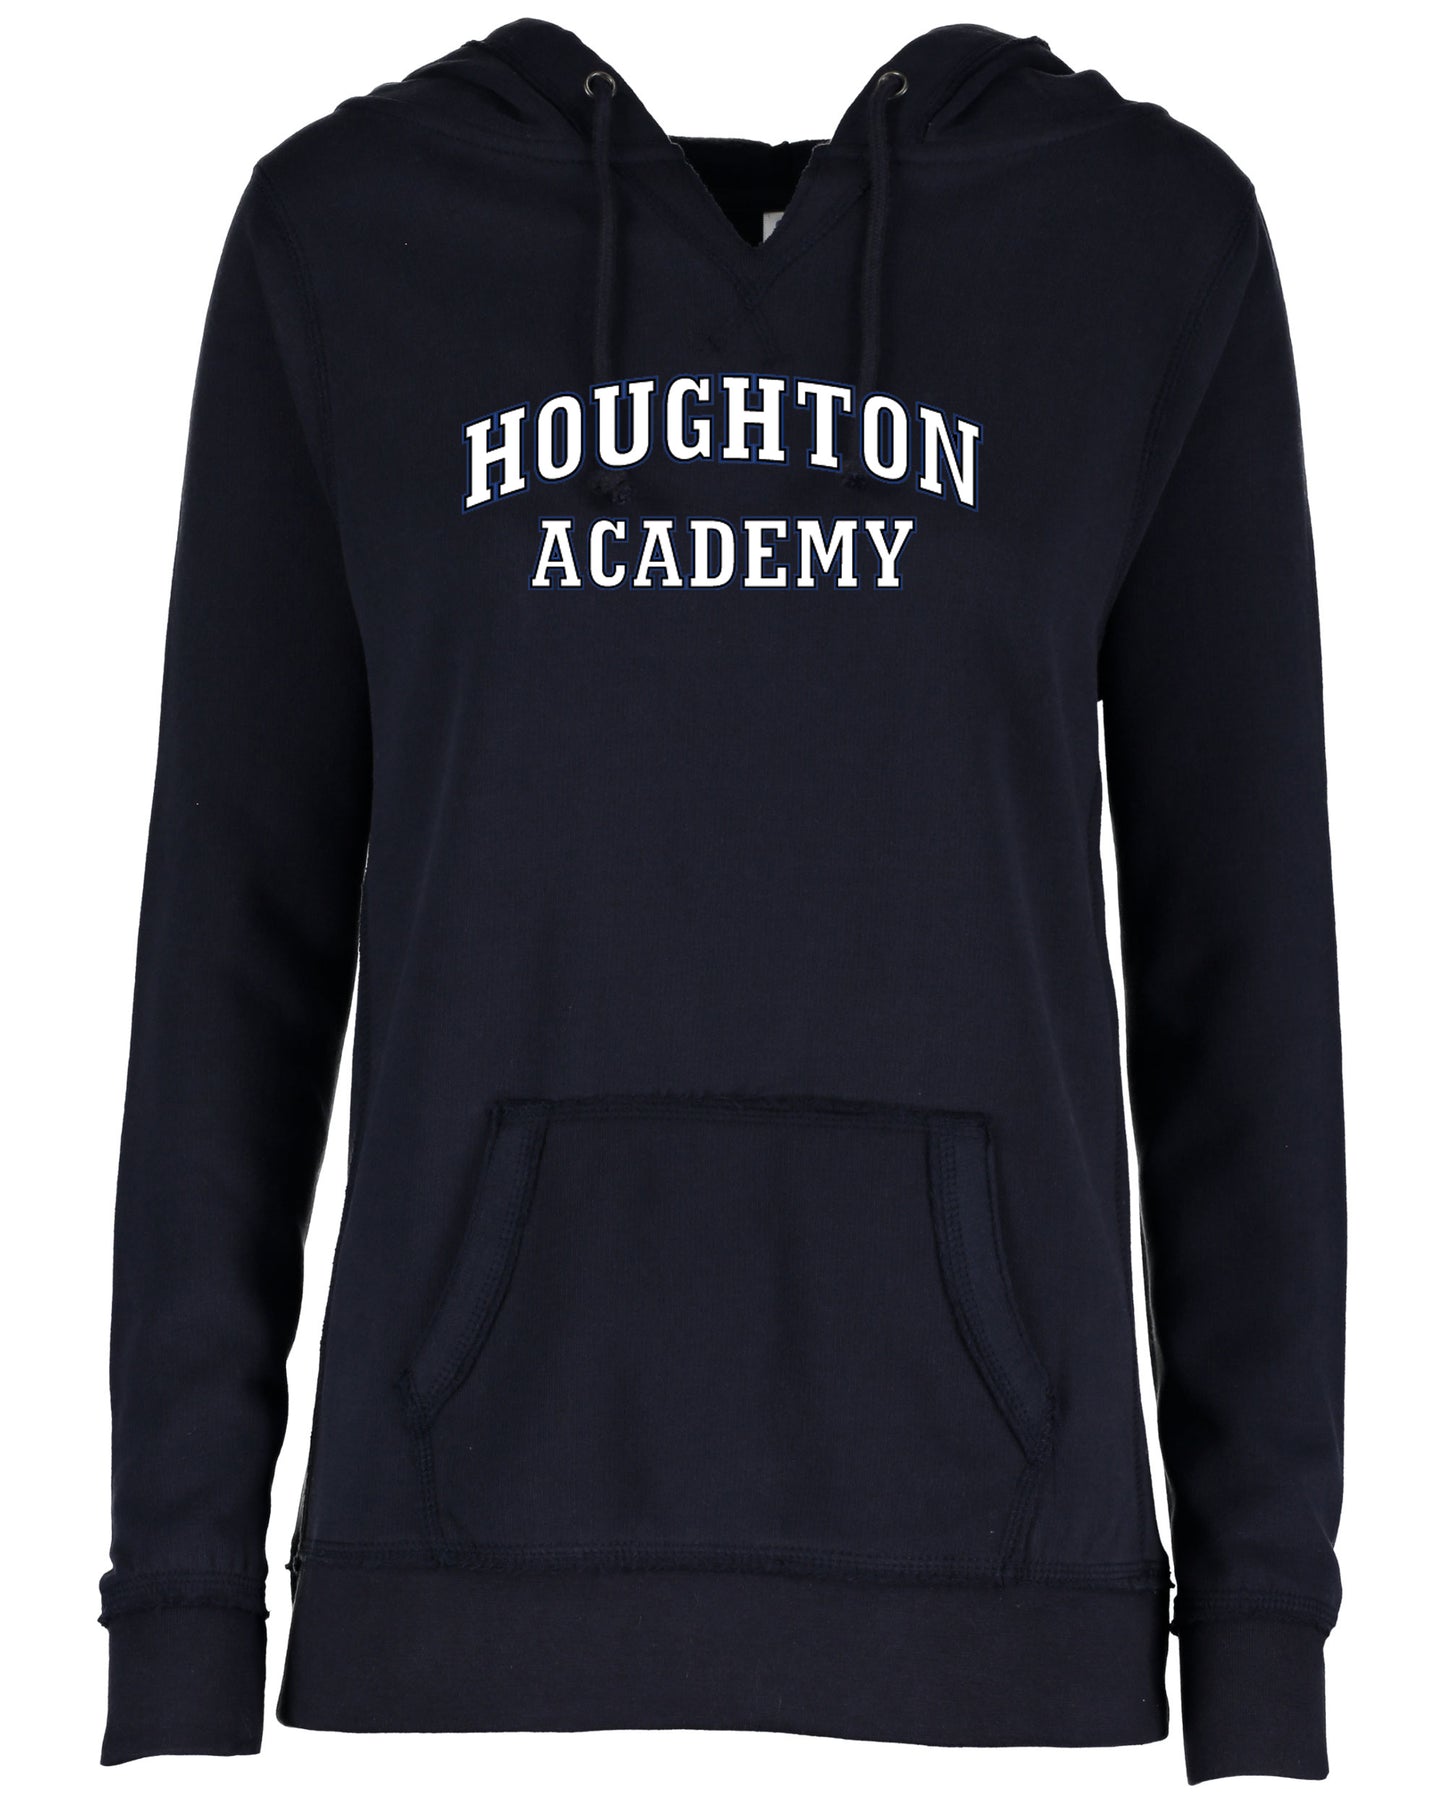 Houghton Academy (Houghton Academy Words) Ladies V-notch hoodie